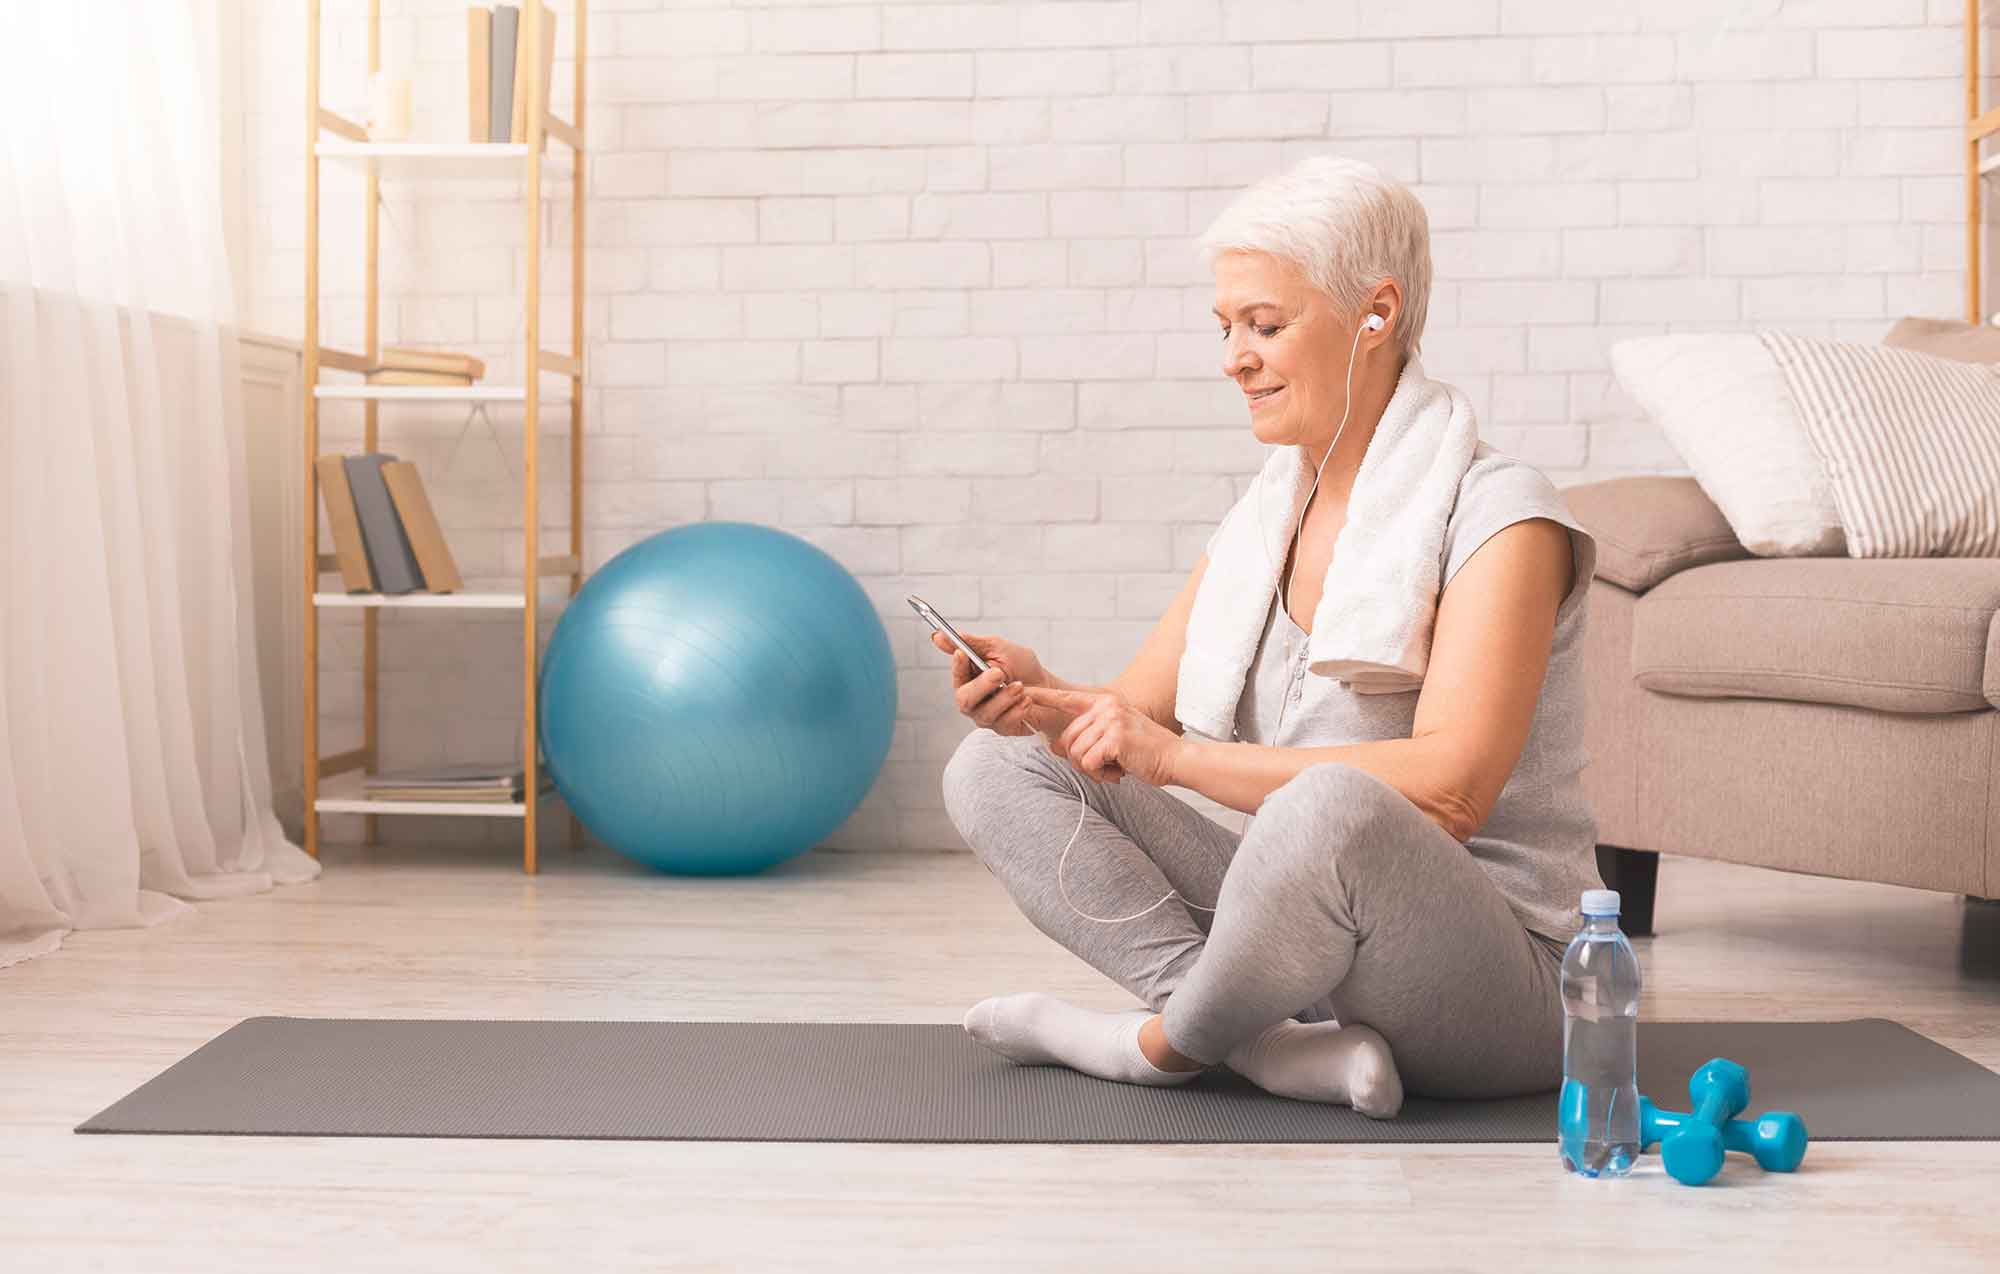 According to various experts, mobility is the key to healthy ageing – but the truth is that holding onto it takes plenty of work. Many will agree that in order to retain mobility as you get older, you simply have to embrace it every chance you get. In other words, keep moving to stay supple, and keep motivated to keep moving.